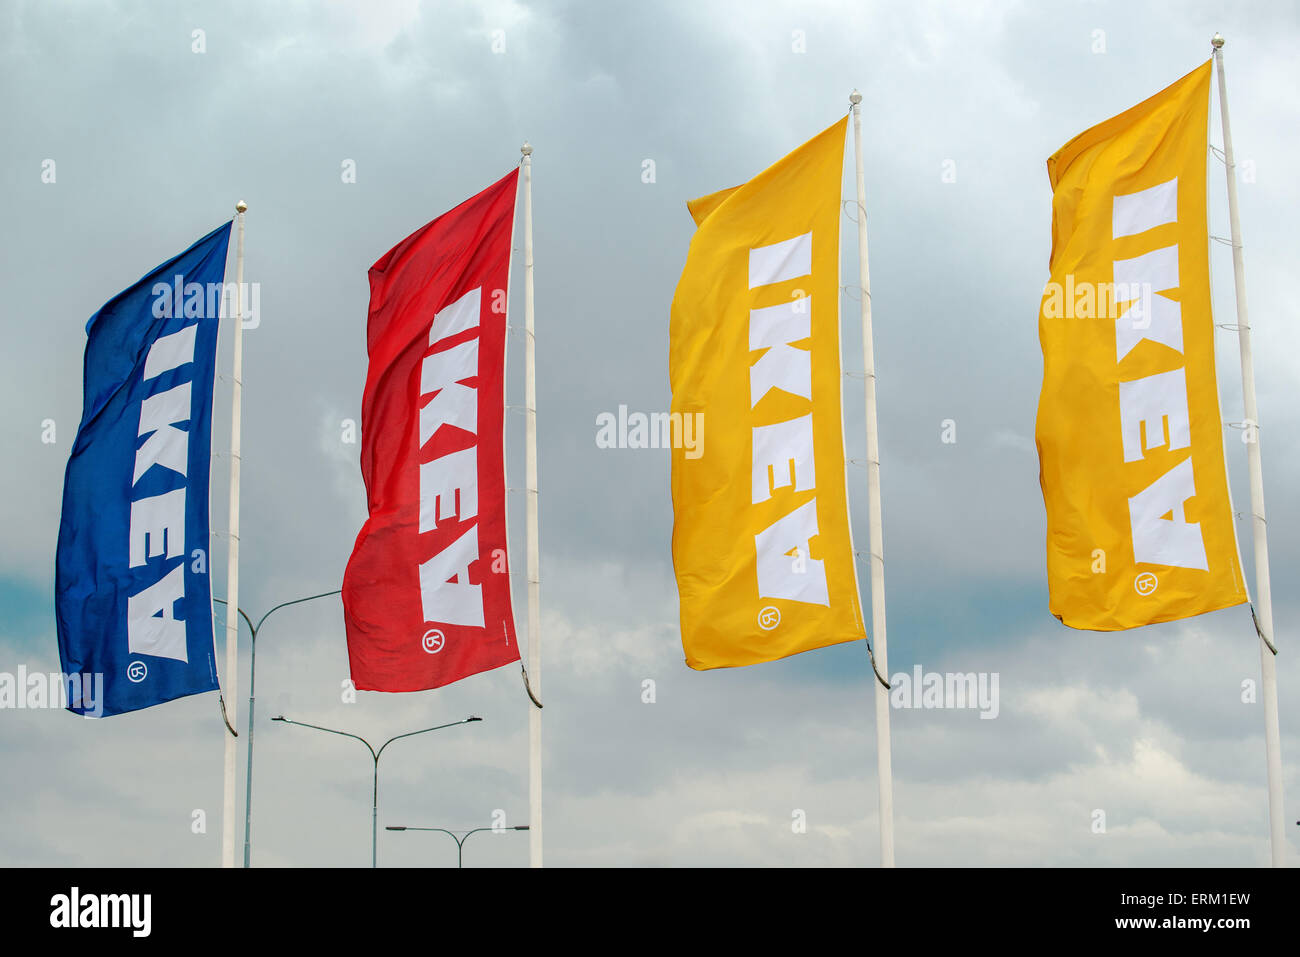 SZEGED, HUNGARY - MAY 27, 2015: Ikea banners waving on wind. Ikea is famous multinational company that designs and sells ready-t Stock Photo